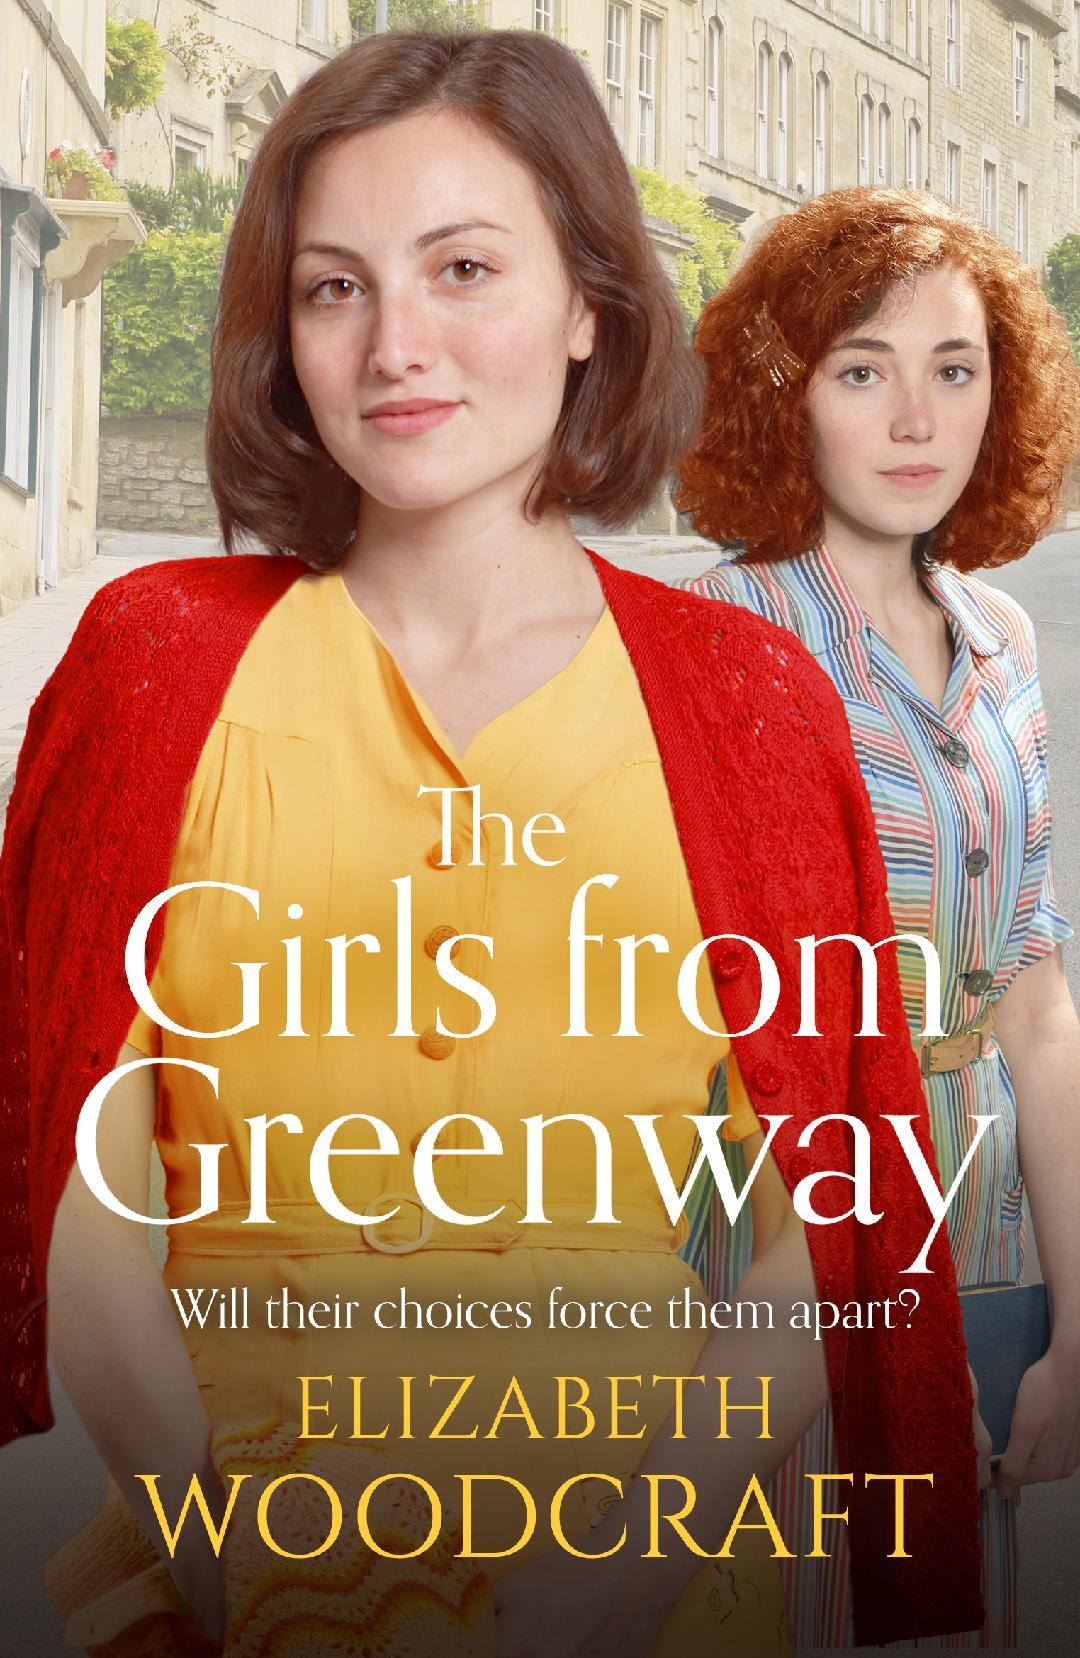 The Girls From Greenway by Elizabeth Woodcraft